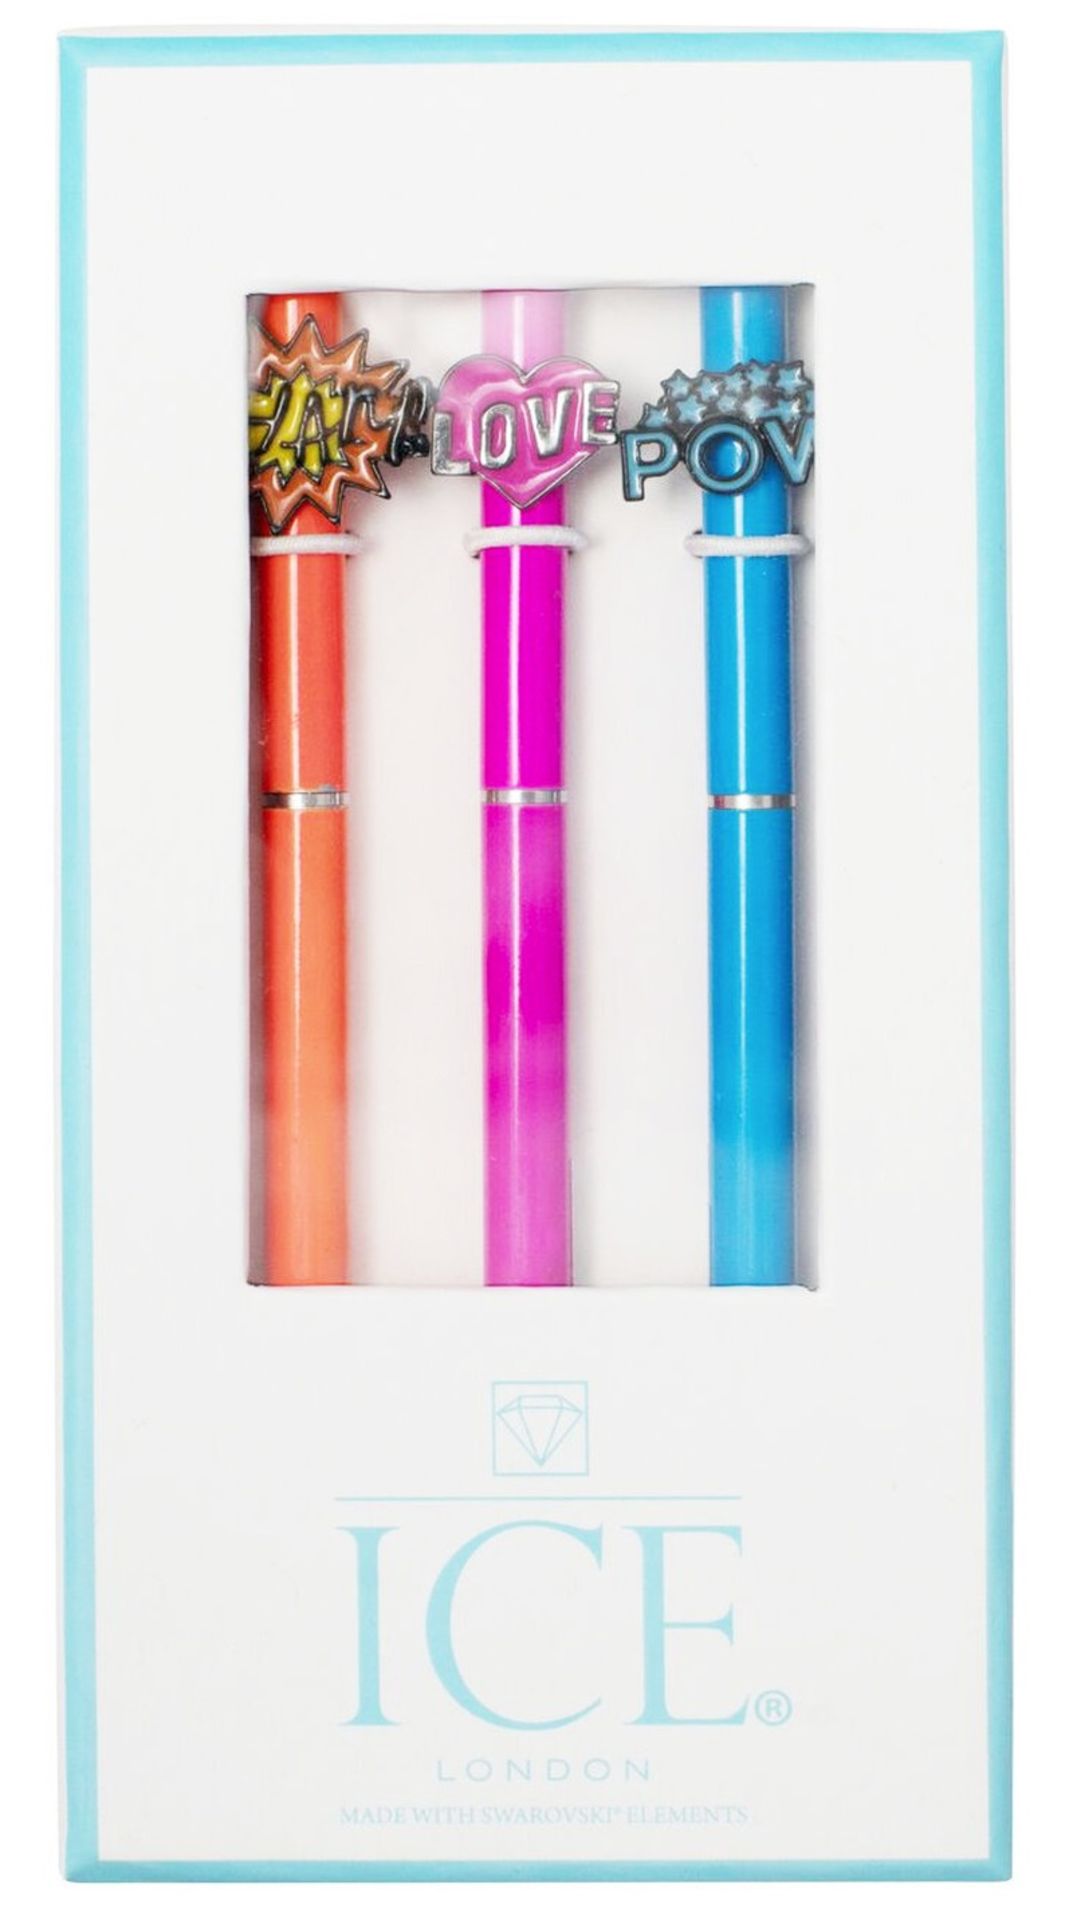 20 x ICE London 'Pop Art' Pen Set - Brand New Sealed Stock - Ideal Gifts With Great Resale Potential - Bild 2 aus 2